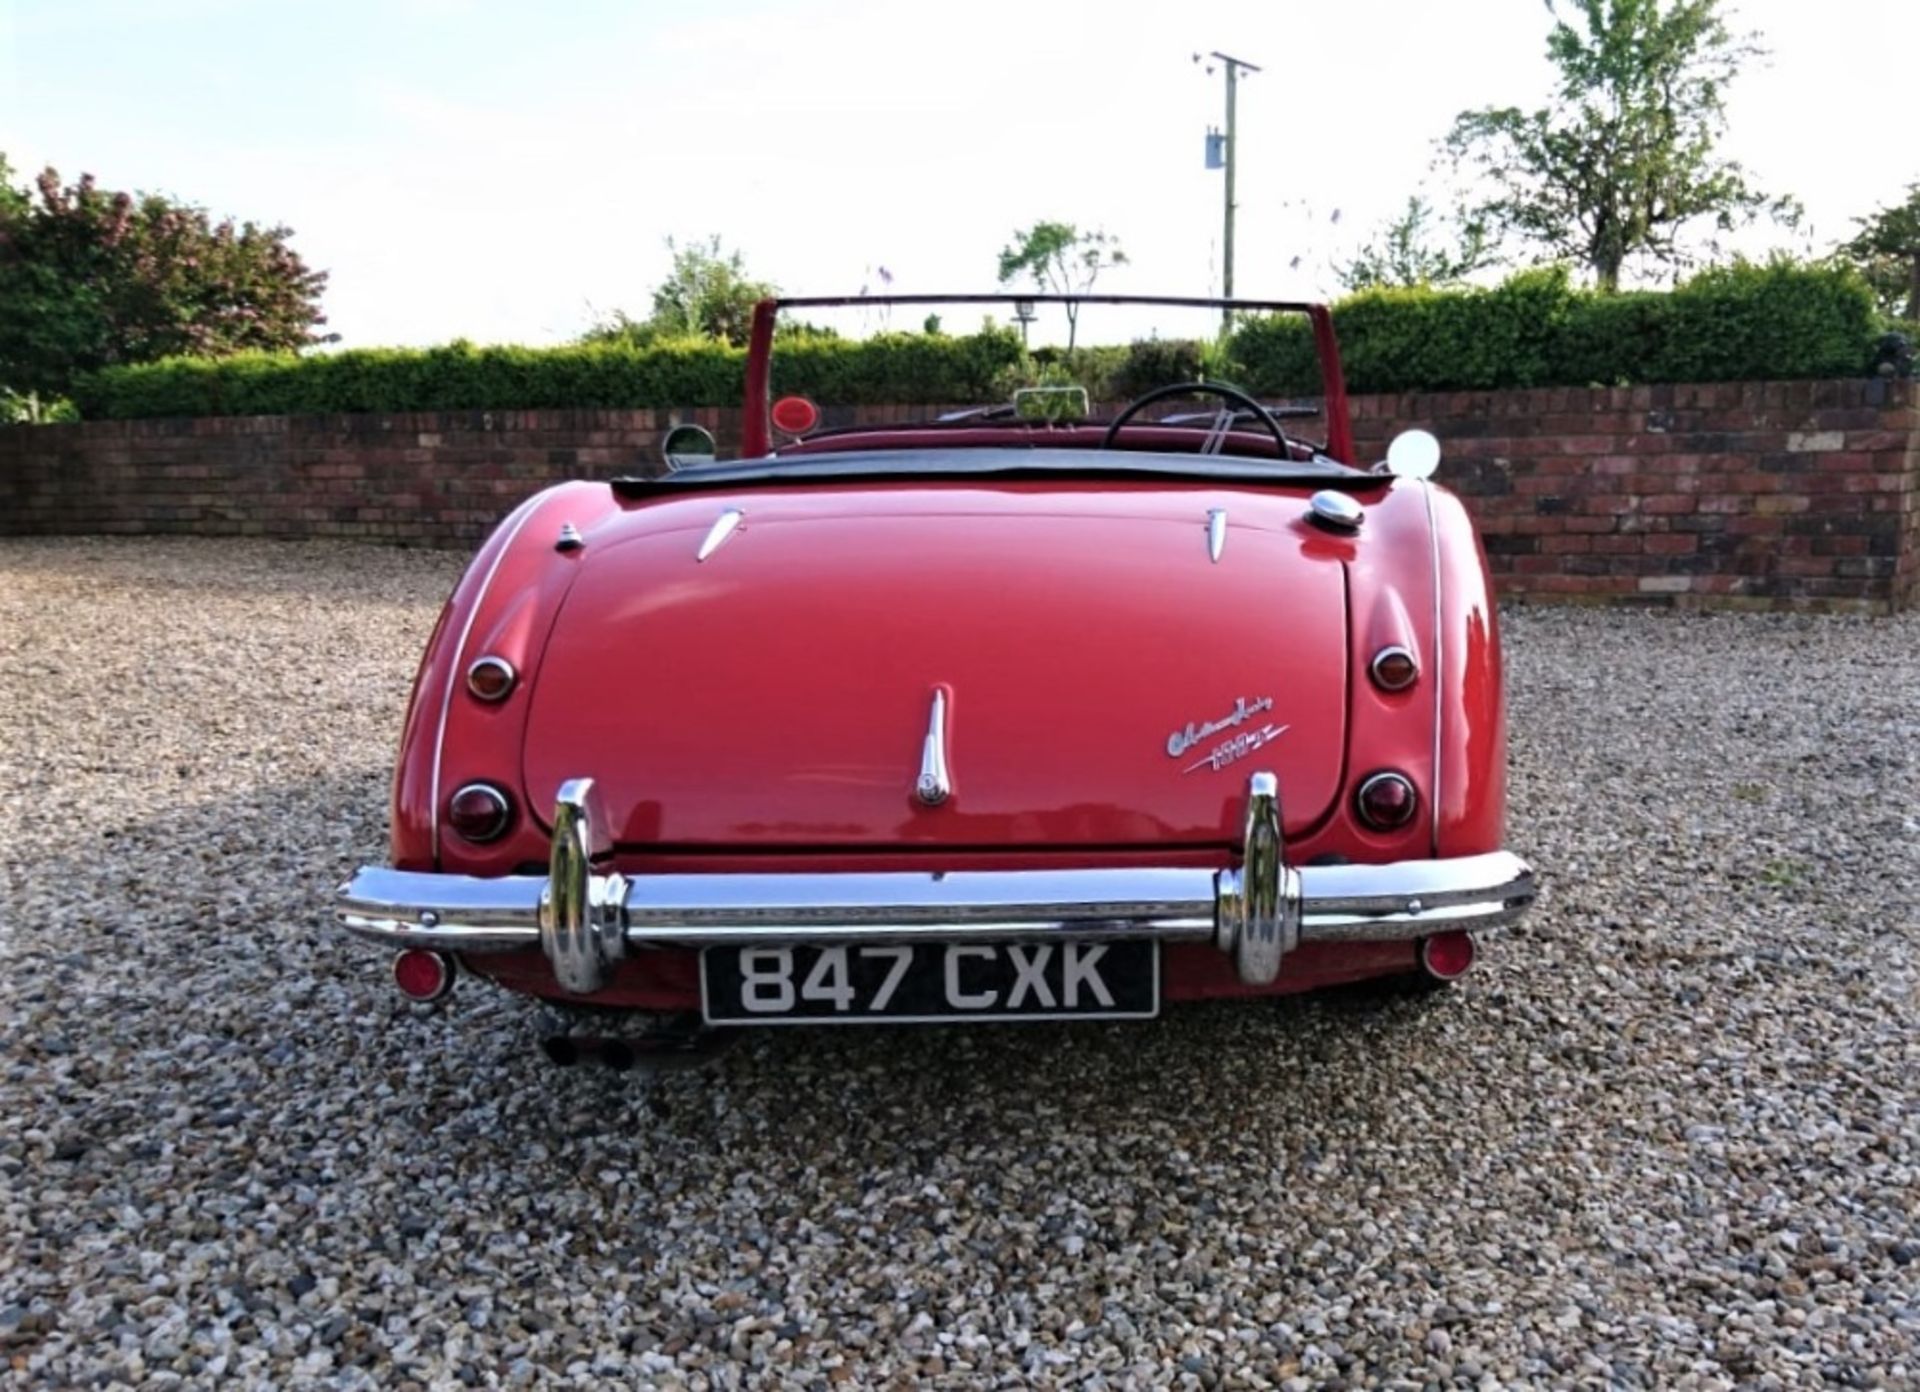 1958 AUSTIN-HEALEY 100/6 Registration Number: 847 CXK Chassis Number: BN6/2341 Recorded Mileage: - Image 7 of 18